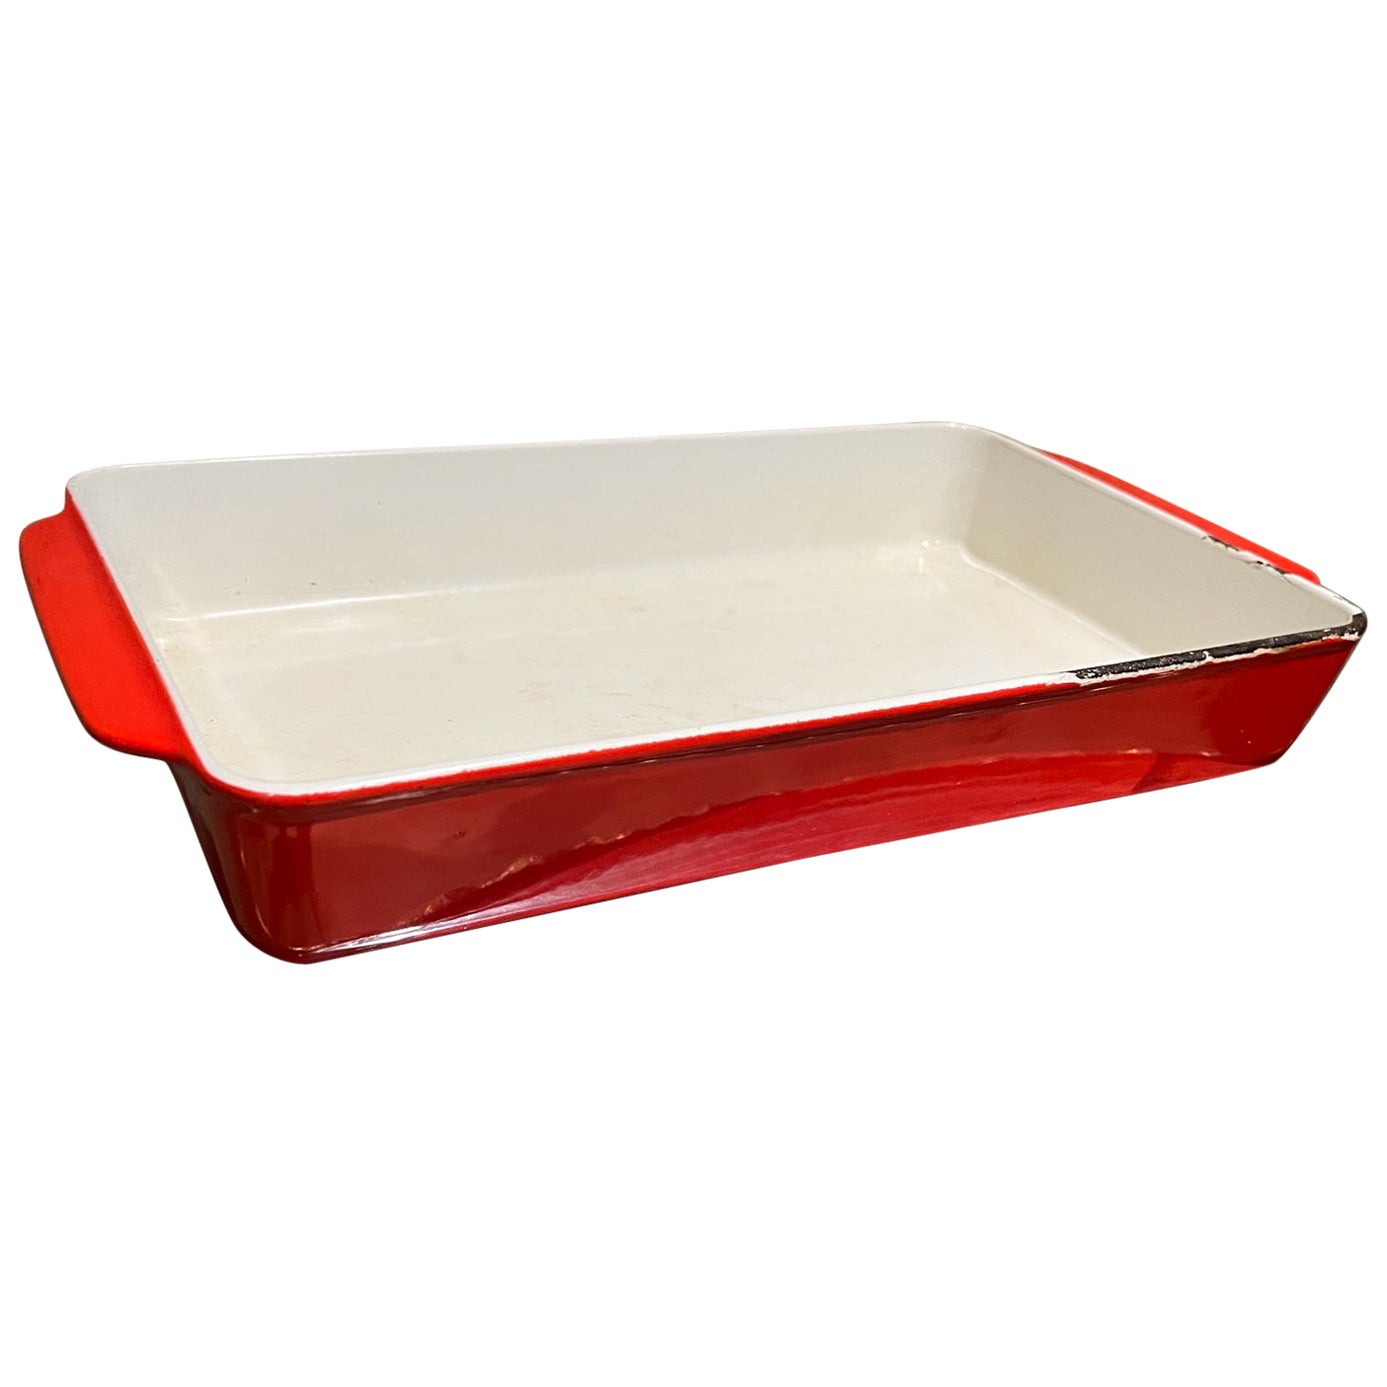 1960s Copco Red Enamelware Casserole Baking Dish Michael Lax Denmark For Sale